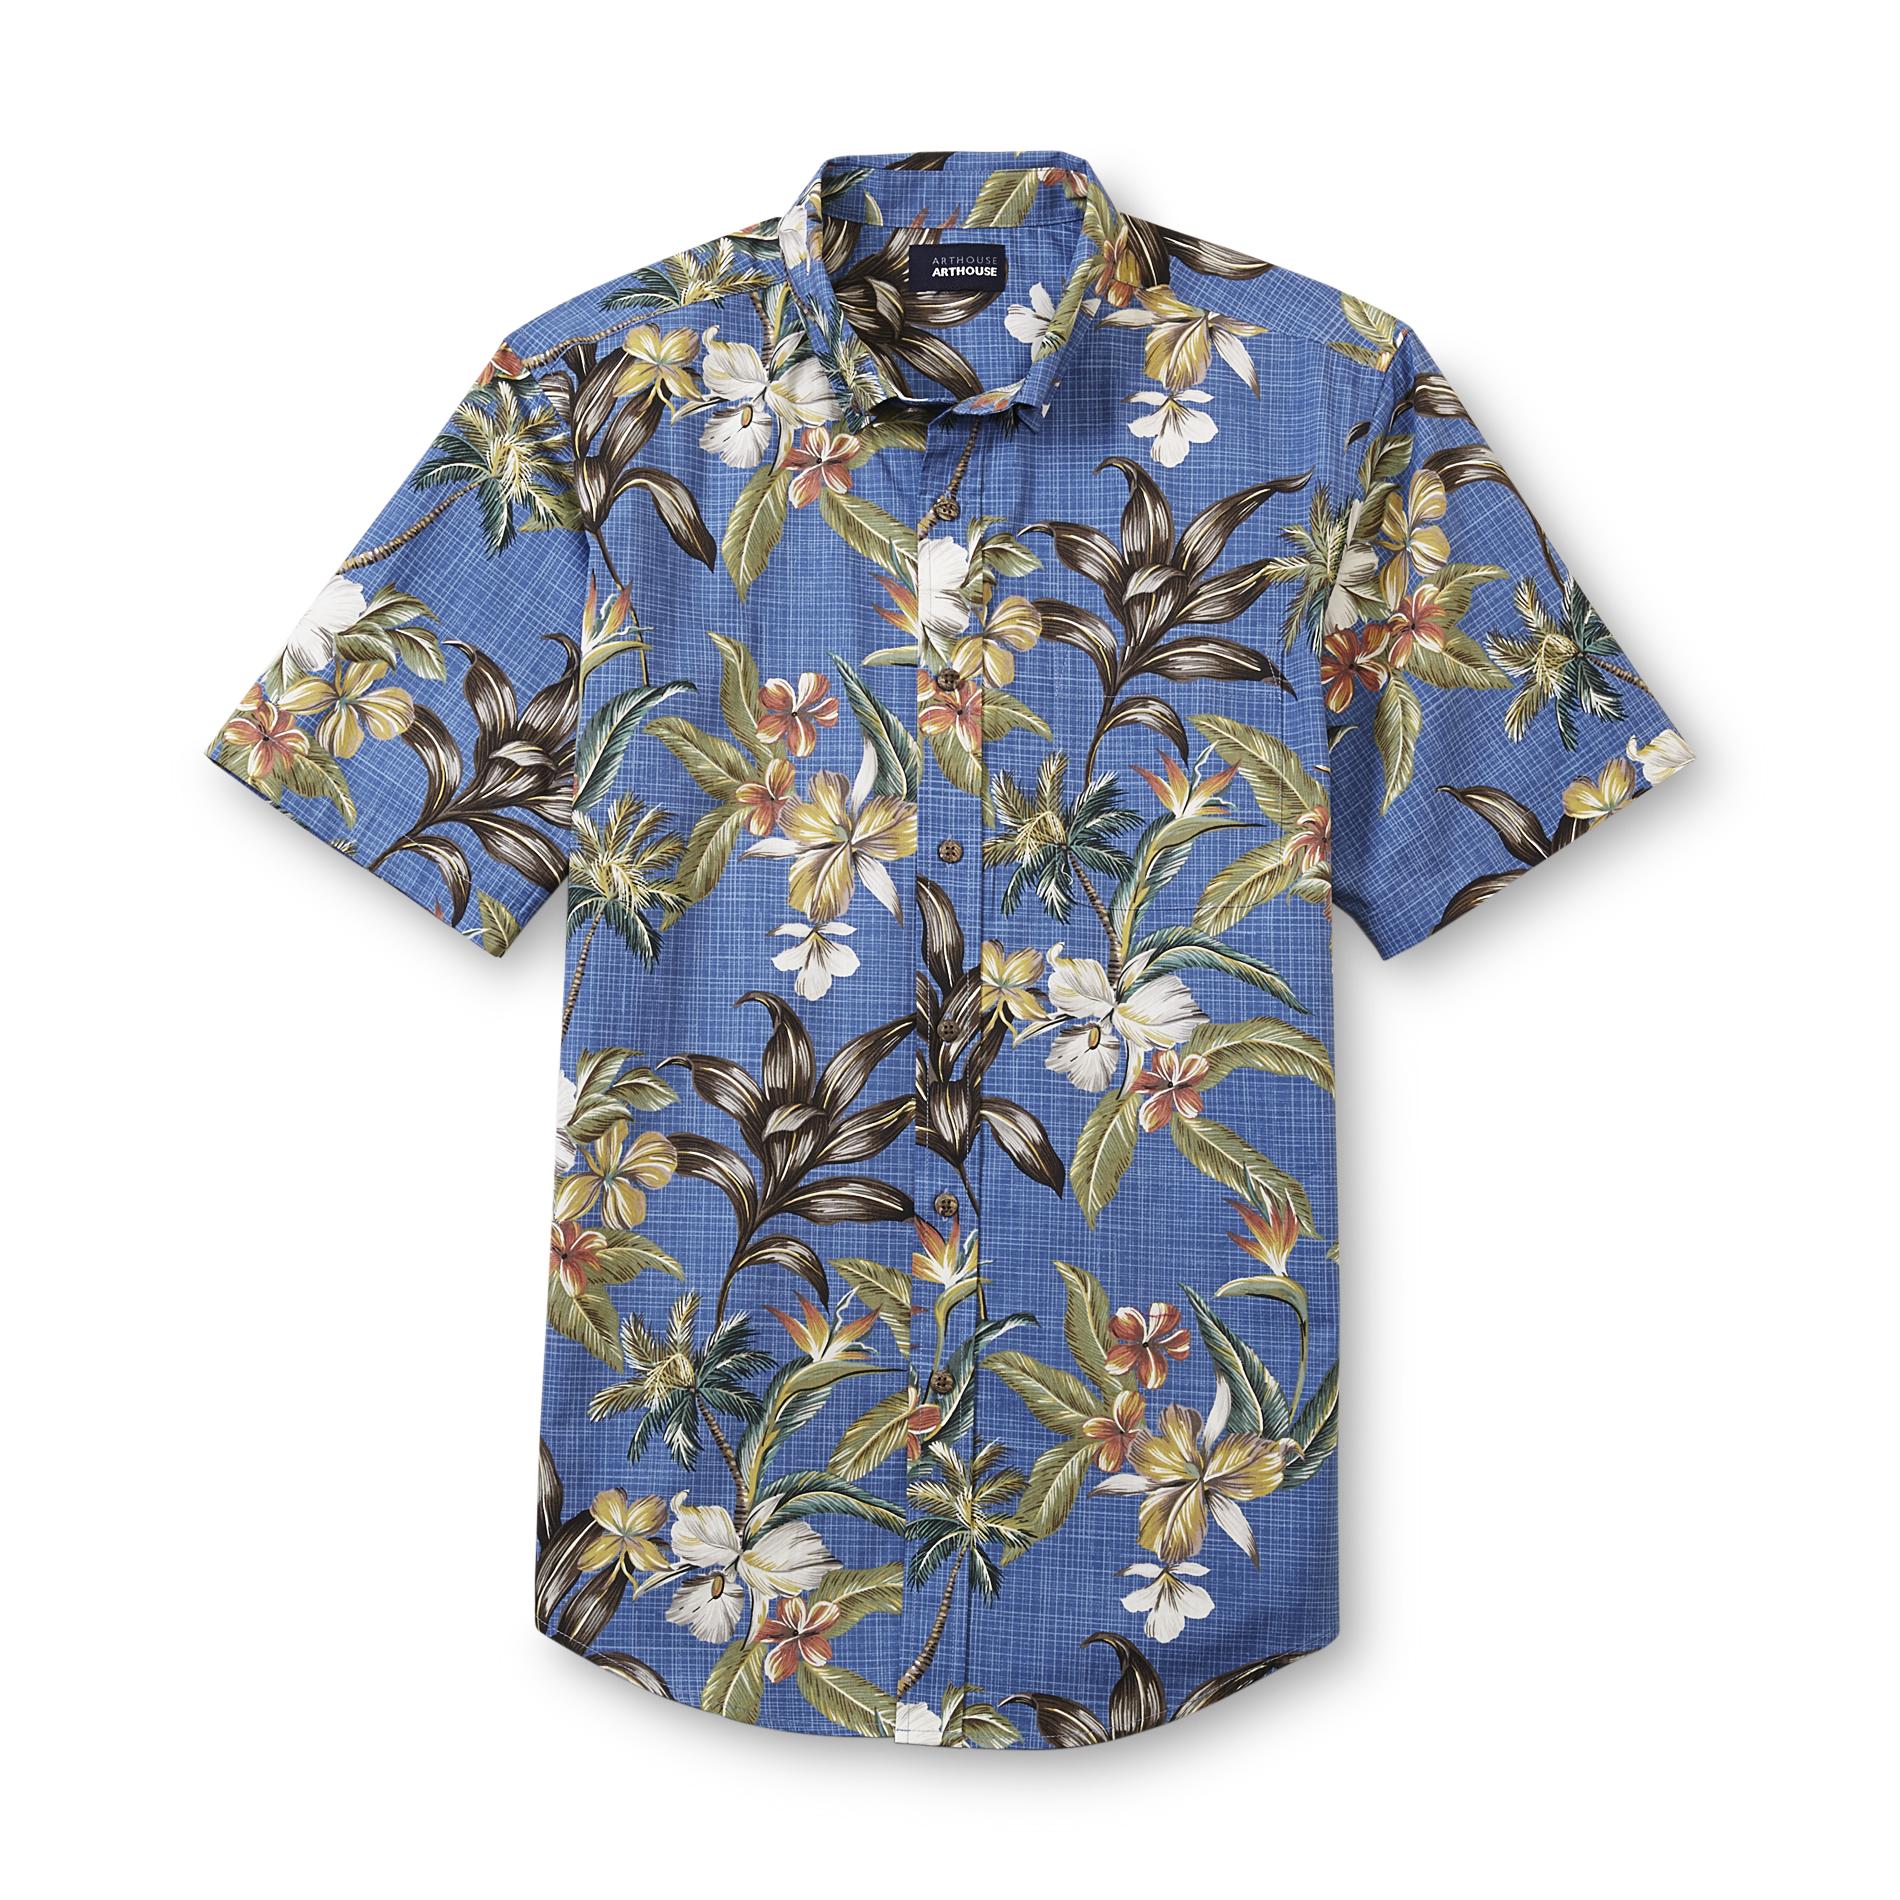 Basic Editions Men's Short-Sleeve Casual Shirt - Floral